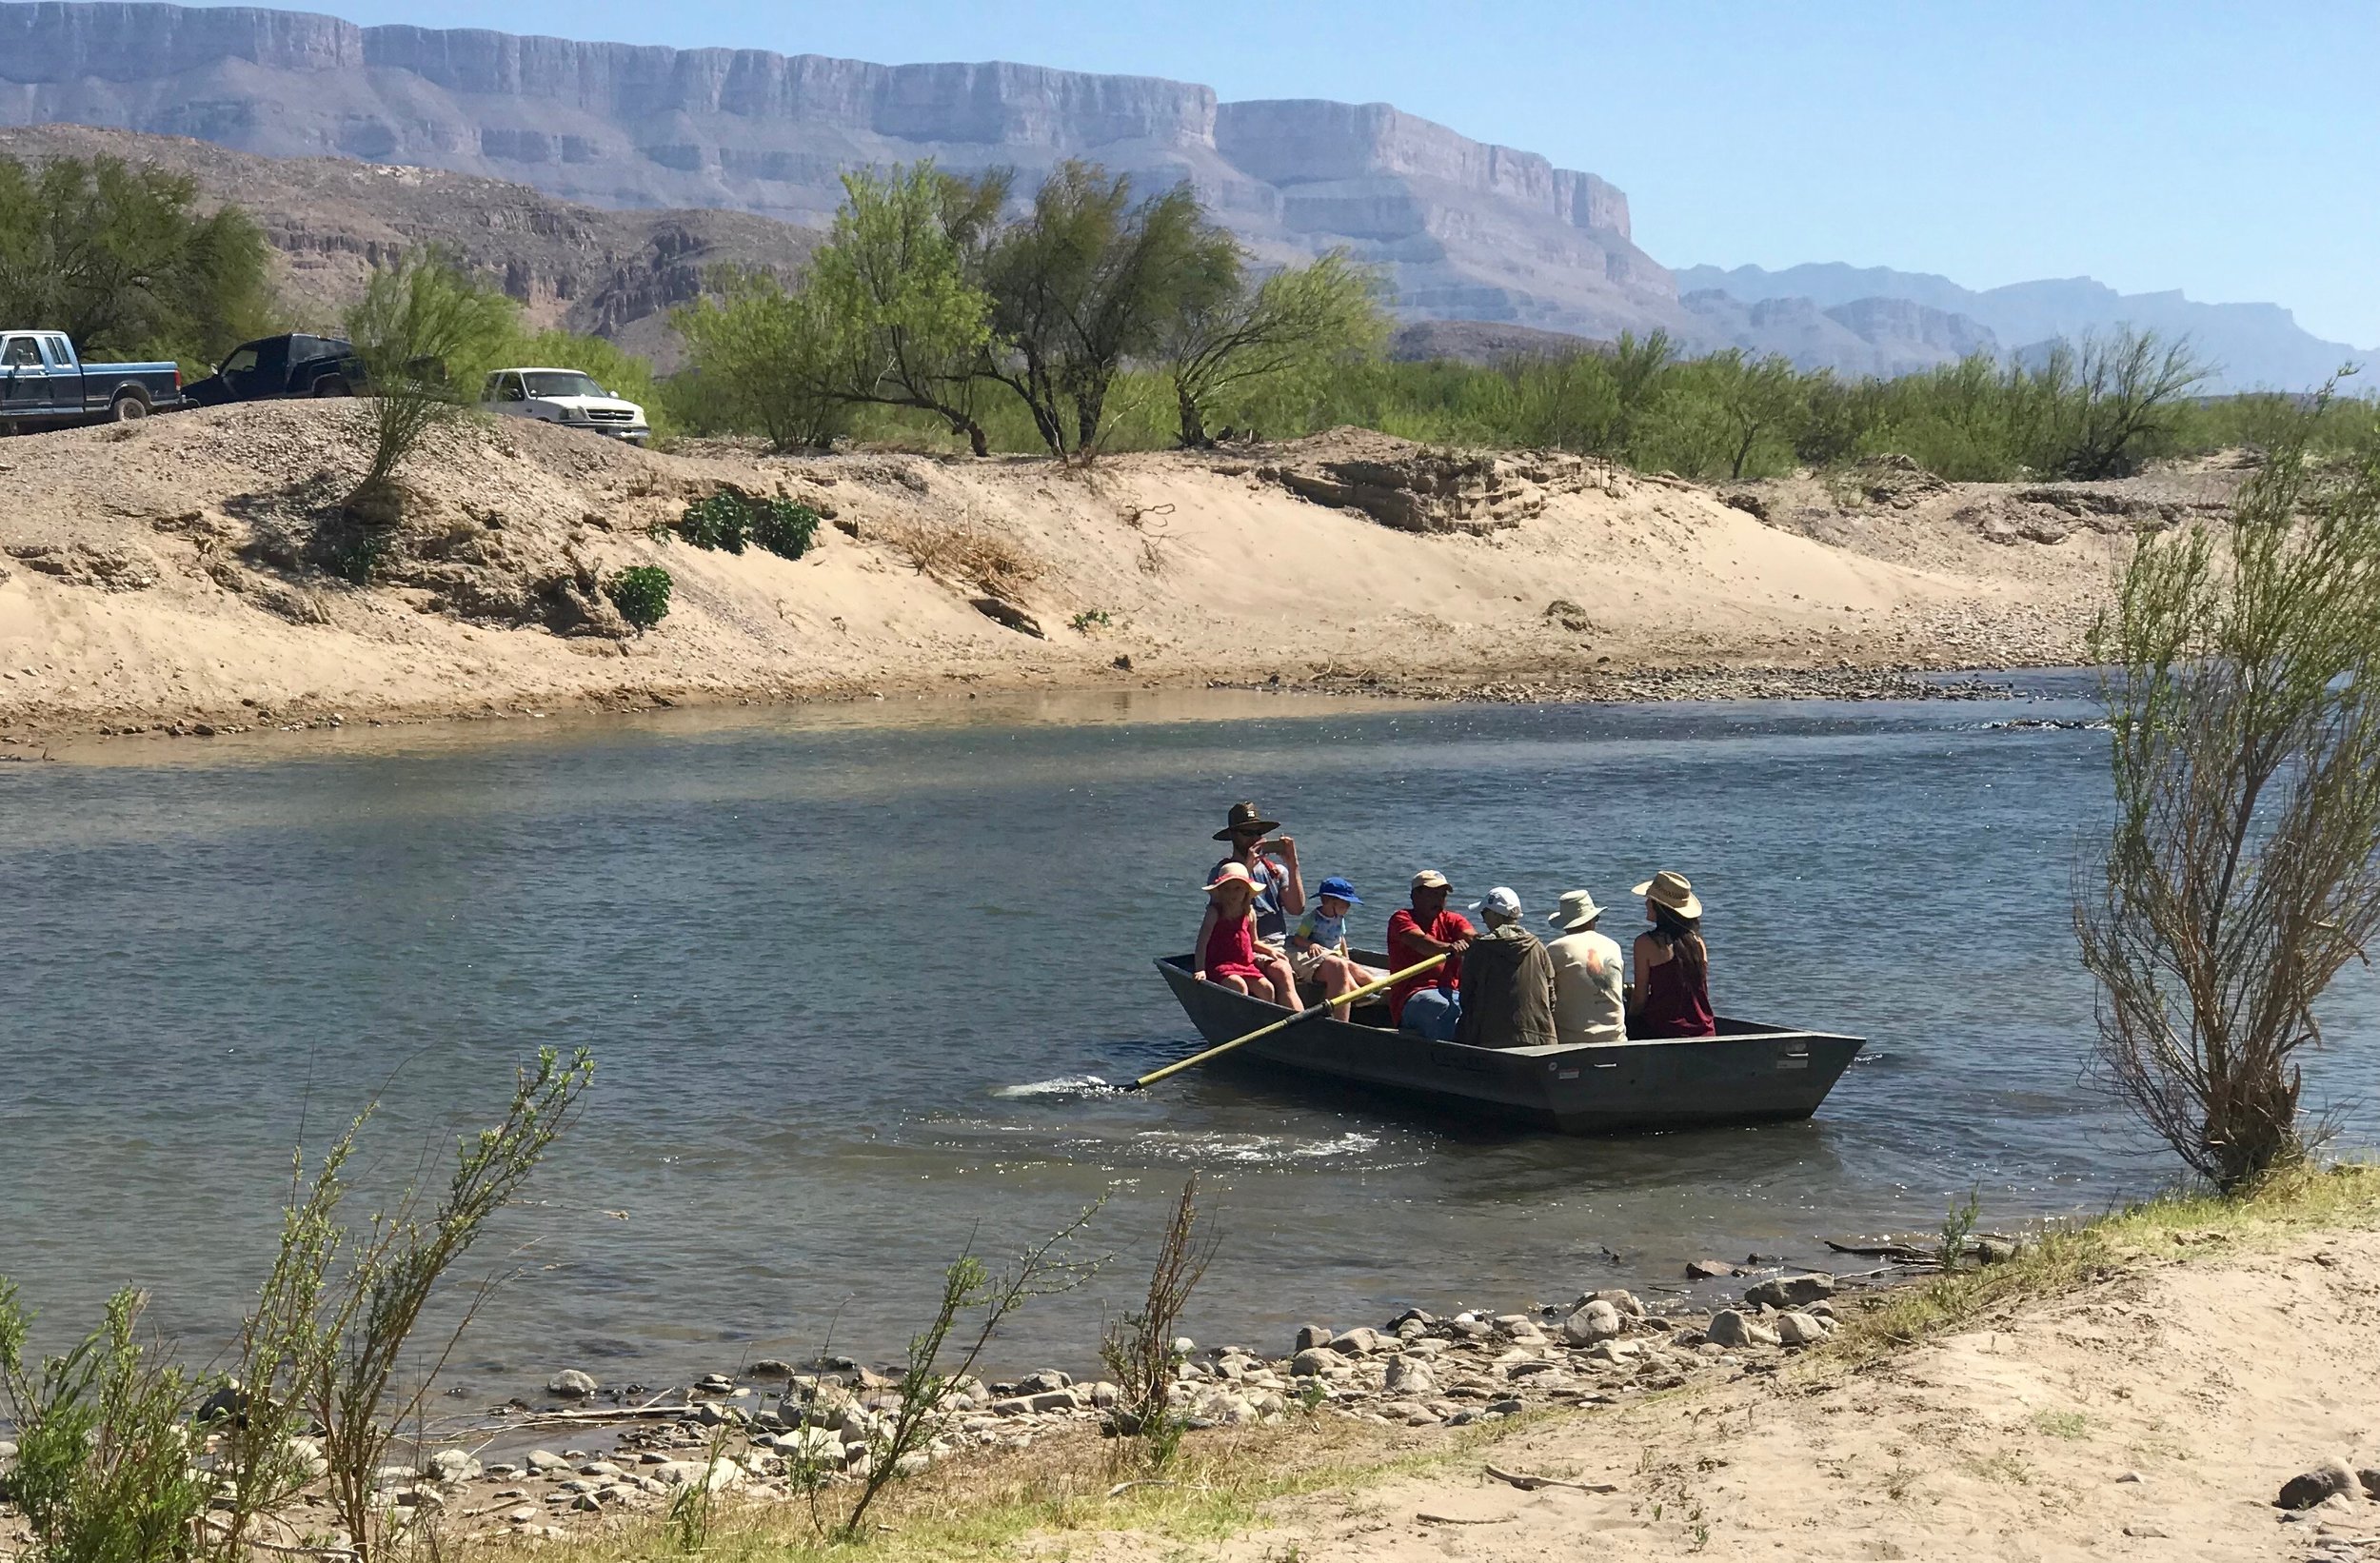  American tourists get a lift across the Rio Grande from Big Bend National Park to Boquillas del Carmen, Mexico. 